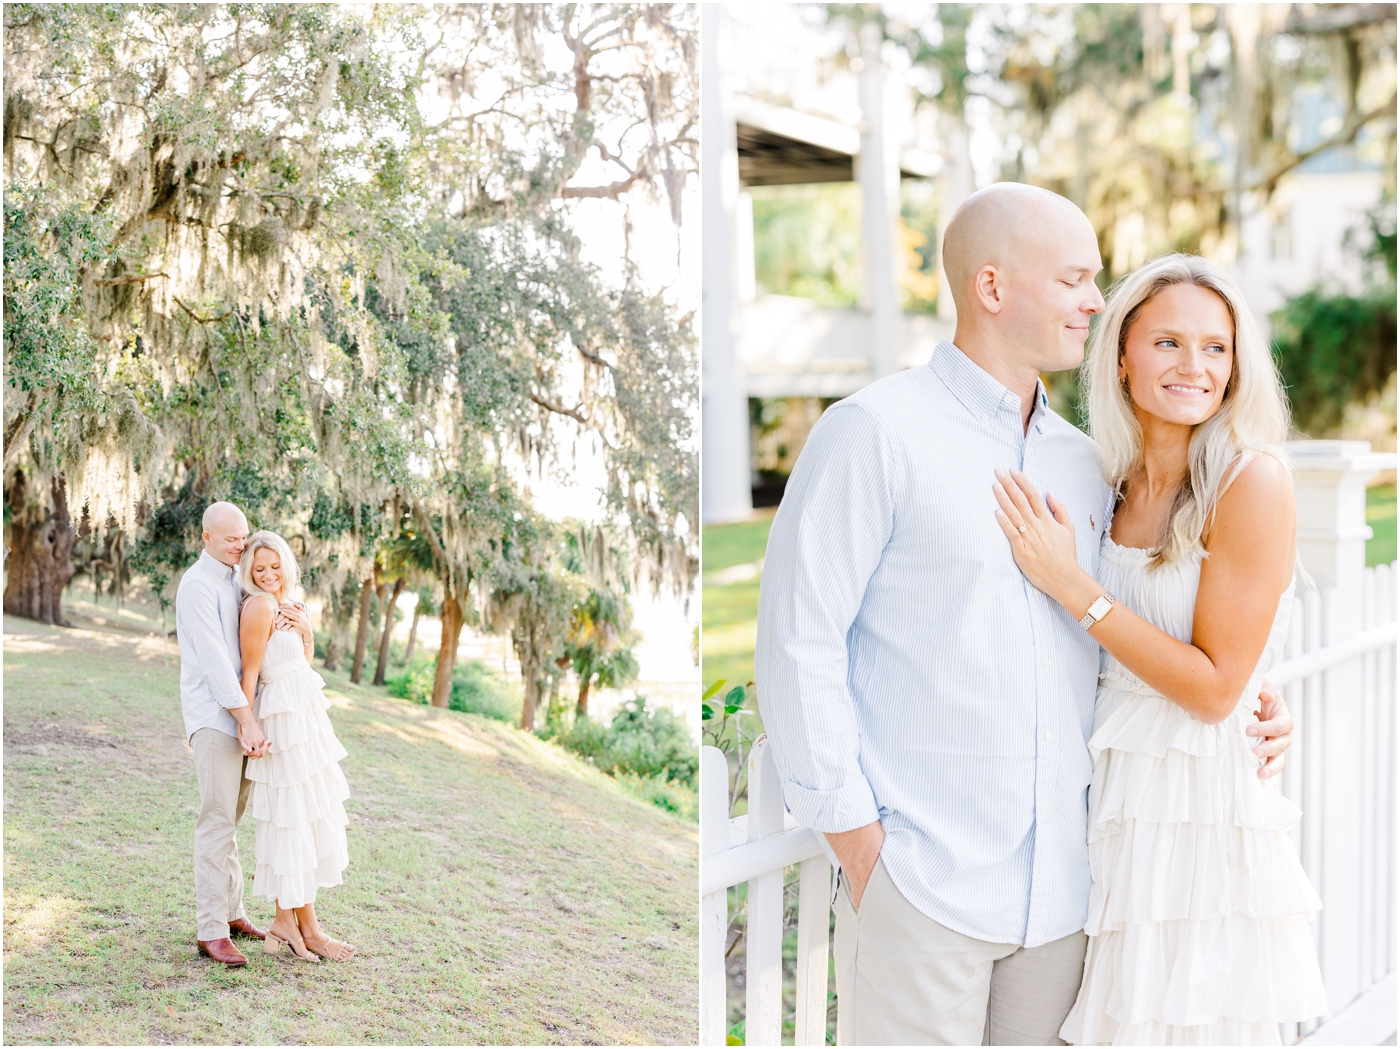 Bay Street Engagement Session in Beaufort, SC